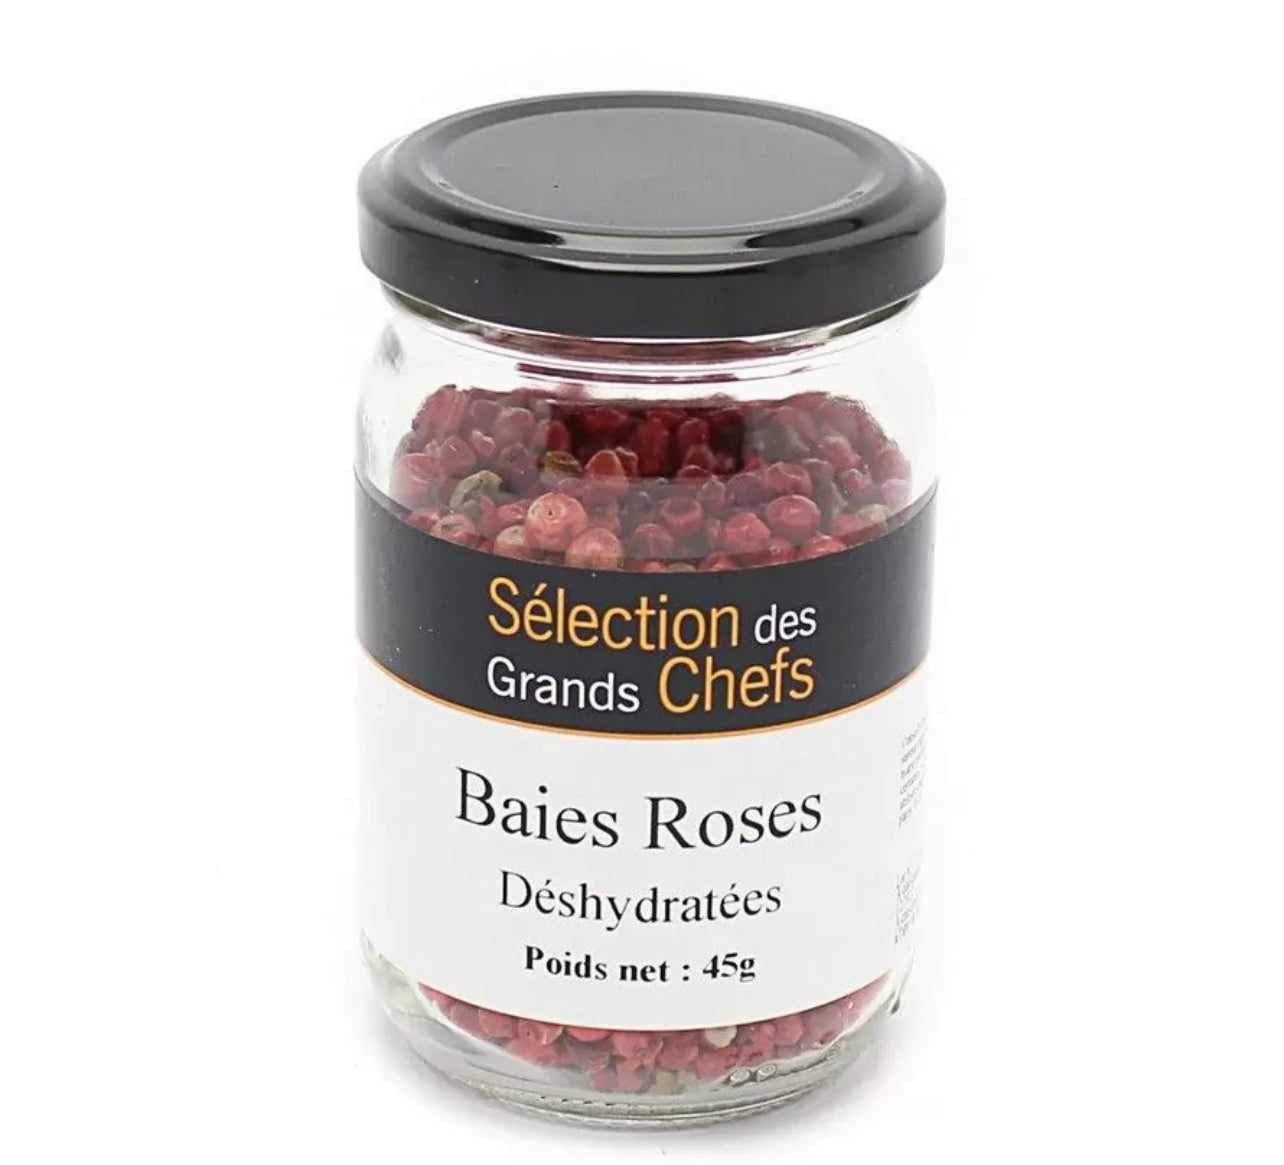 Dehydrated pink berries - 45g